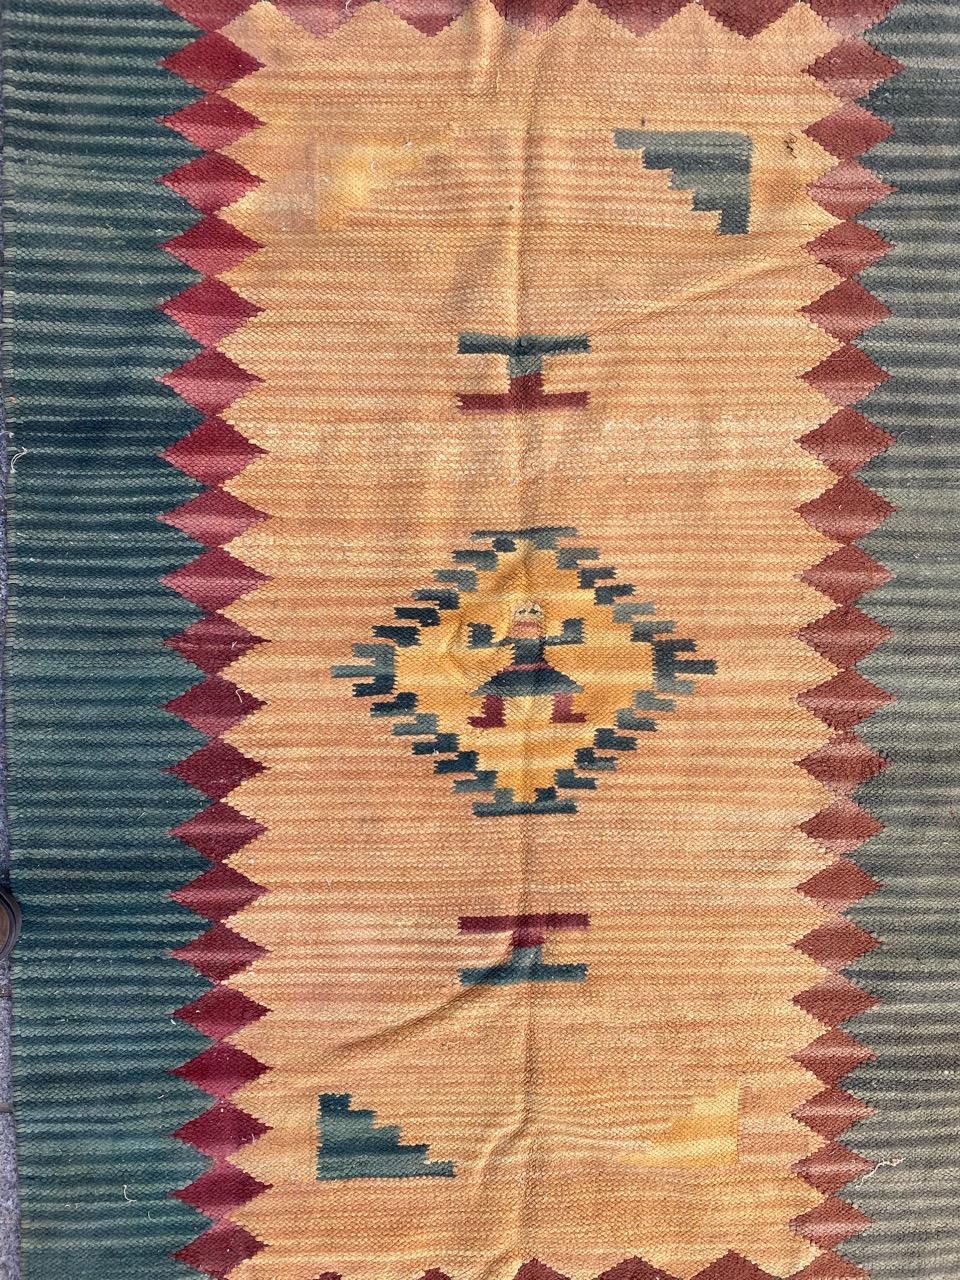 Very beautiful late 20th century Indian durhie Kilim with a geometrical tribal design and nice colors, entirely hand woven with cotton on cotton foundation.